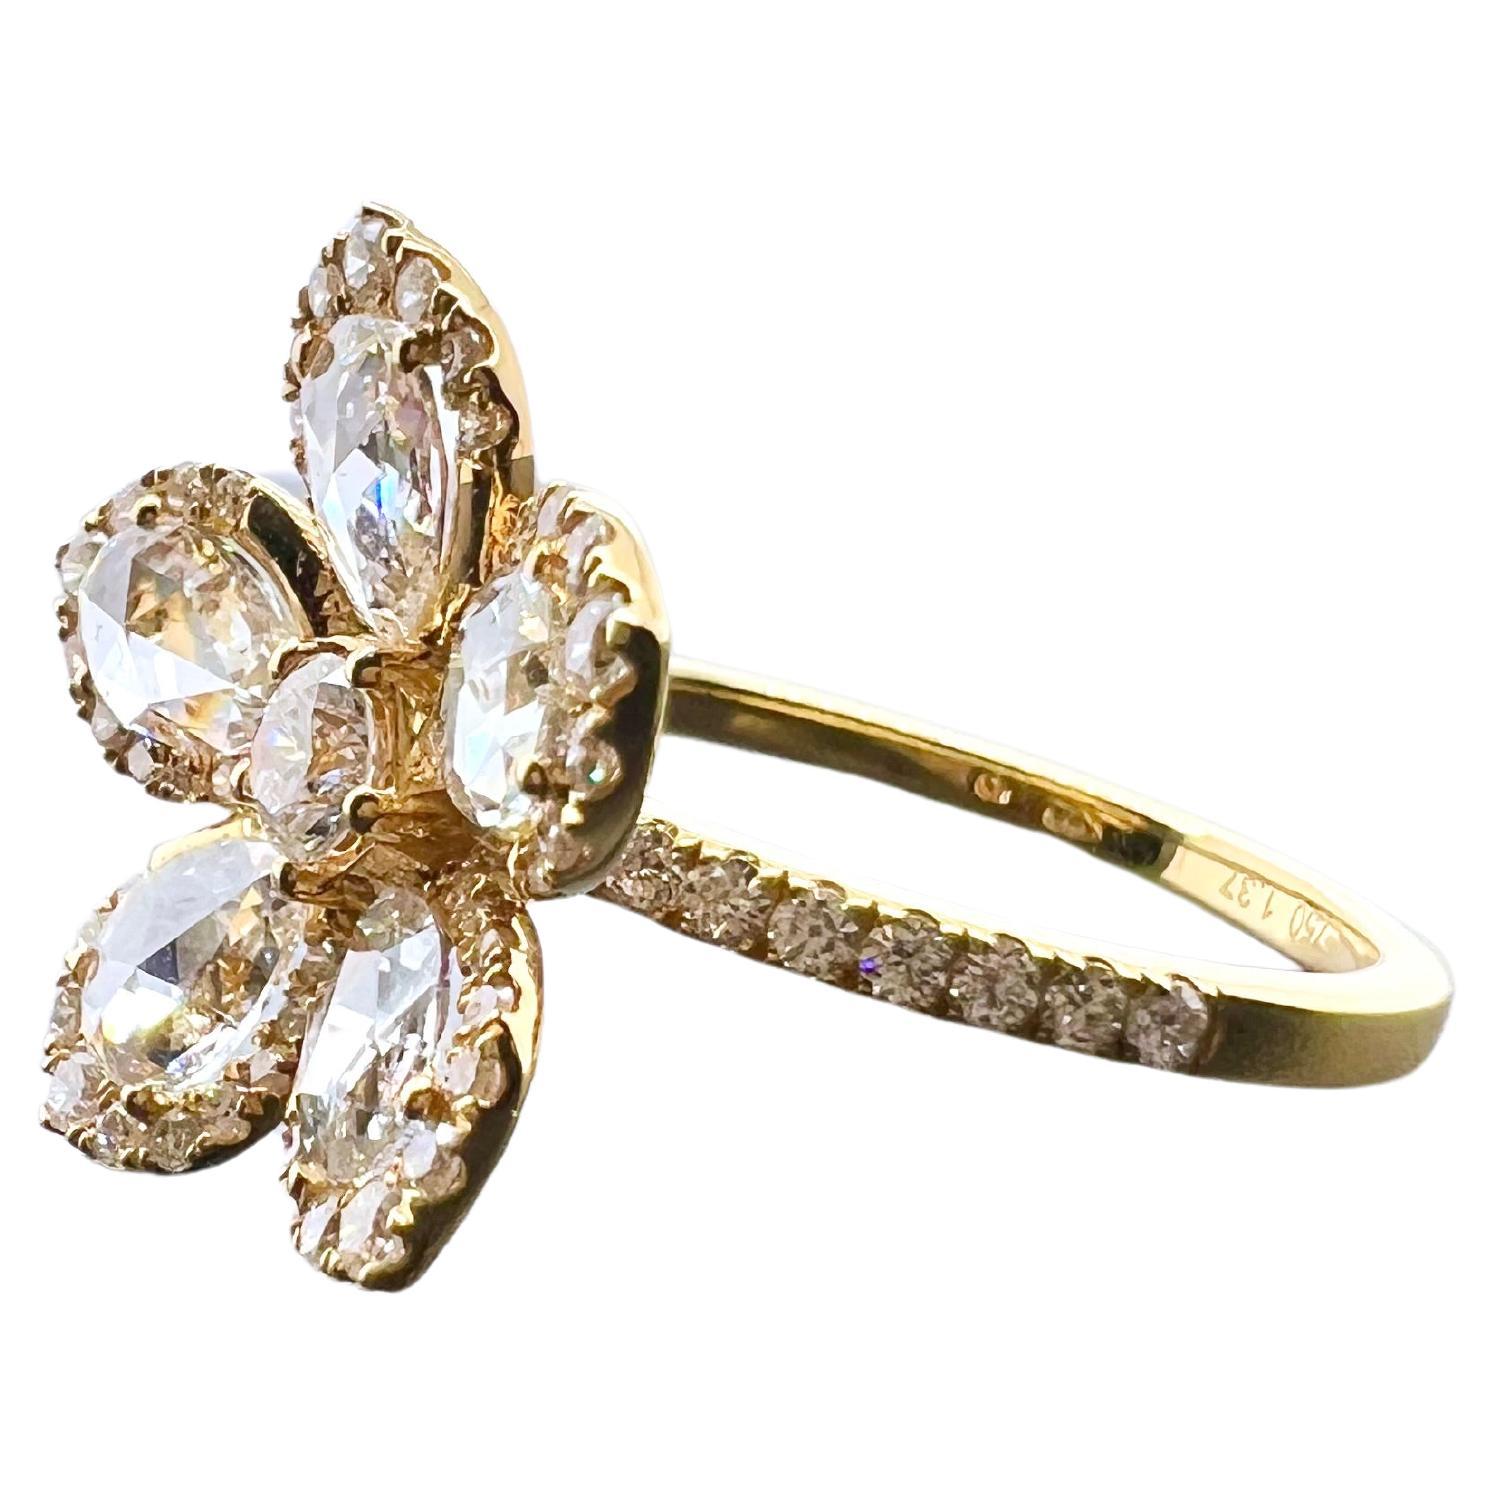 This ring is phenomenal. The flower petals are made up of rose cut diamonds! The round brilliant diamonds are set surrounding the frame but the focal eye candy will be on the gorgeous rose cut diamonds. These diamonds are not found commonly as it